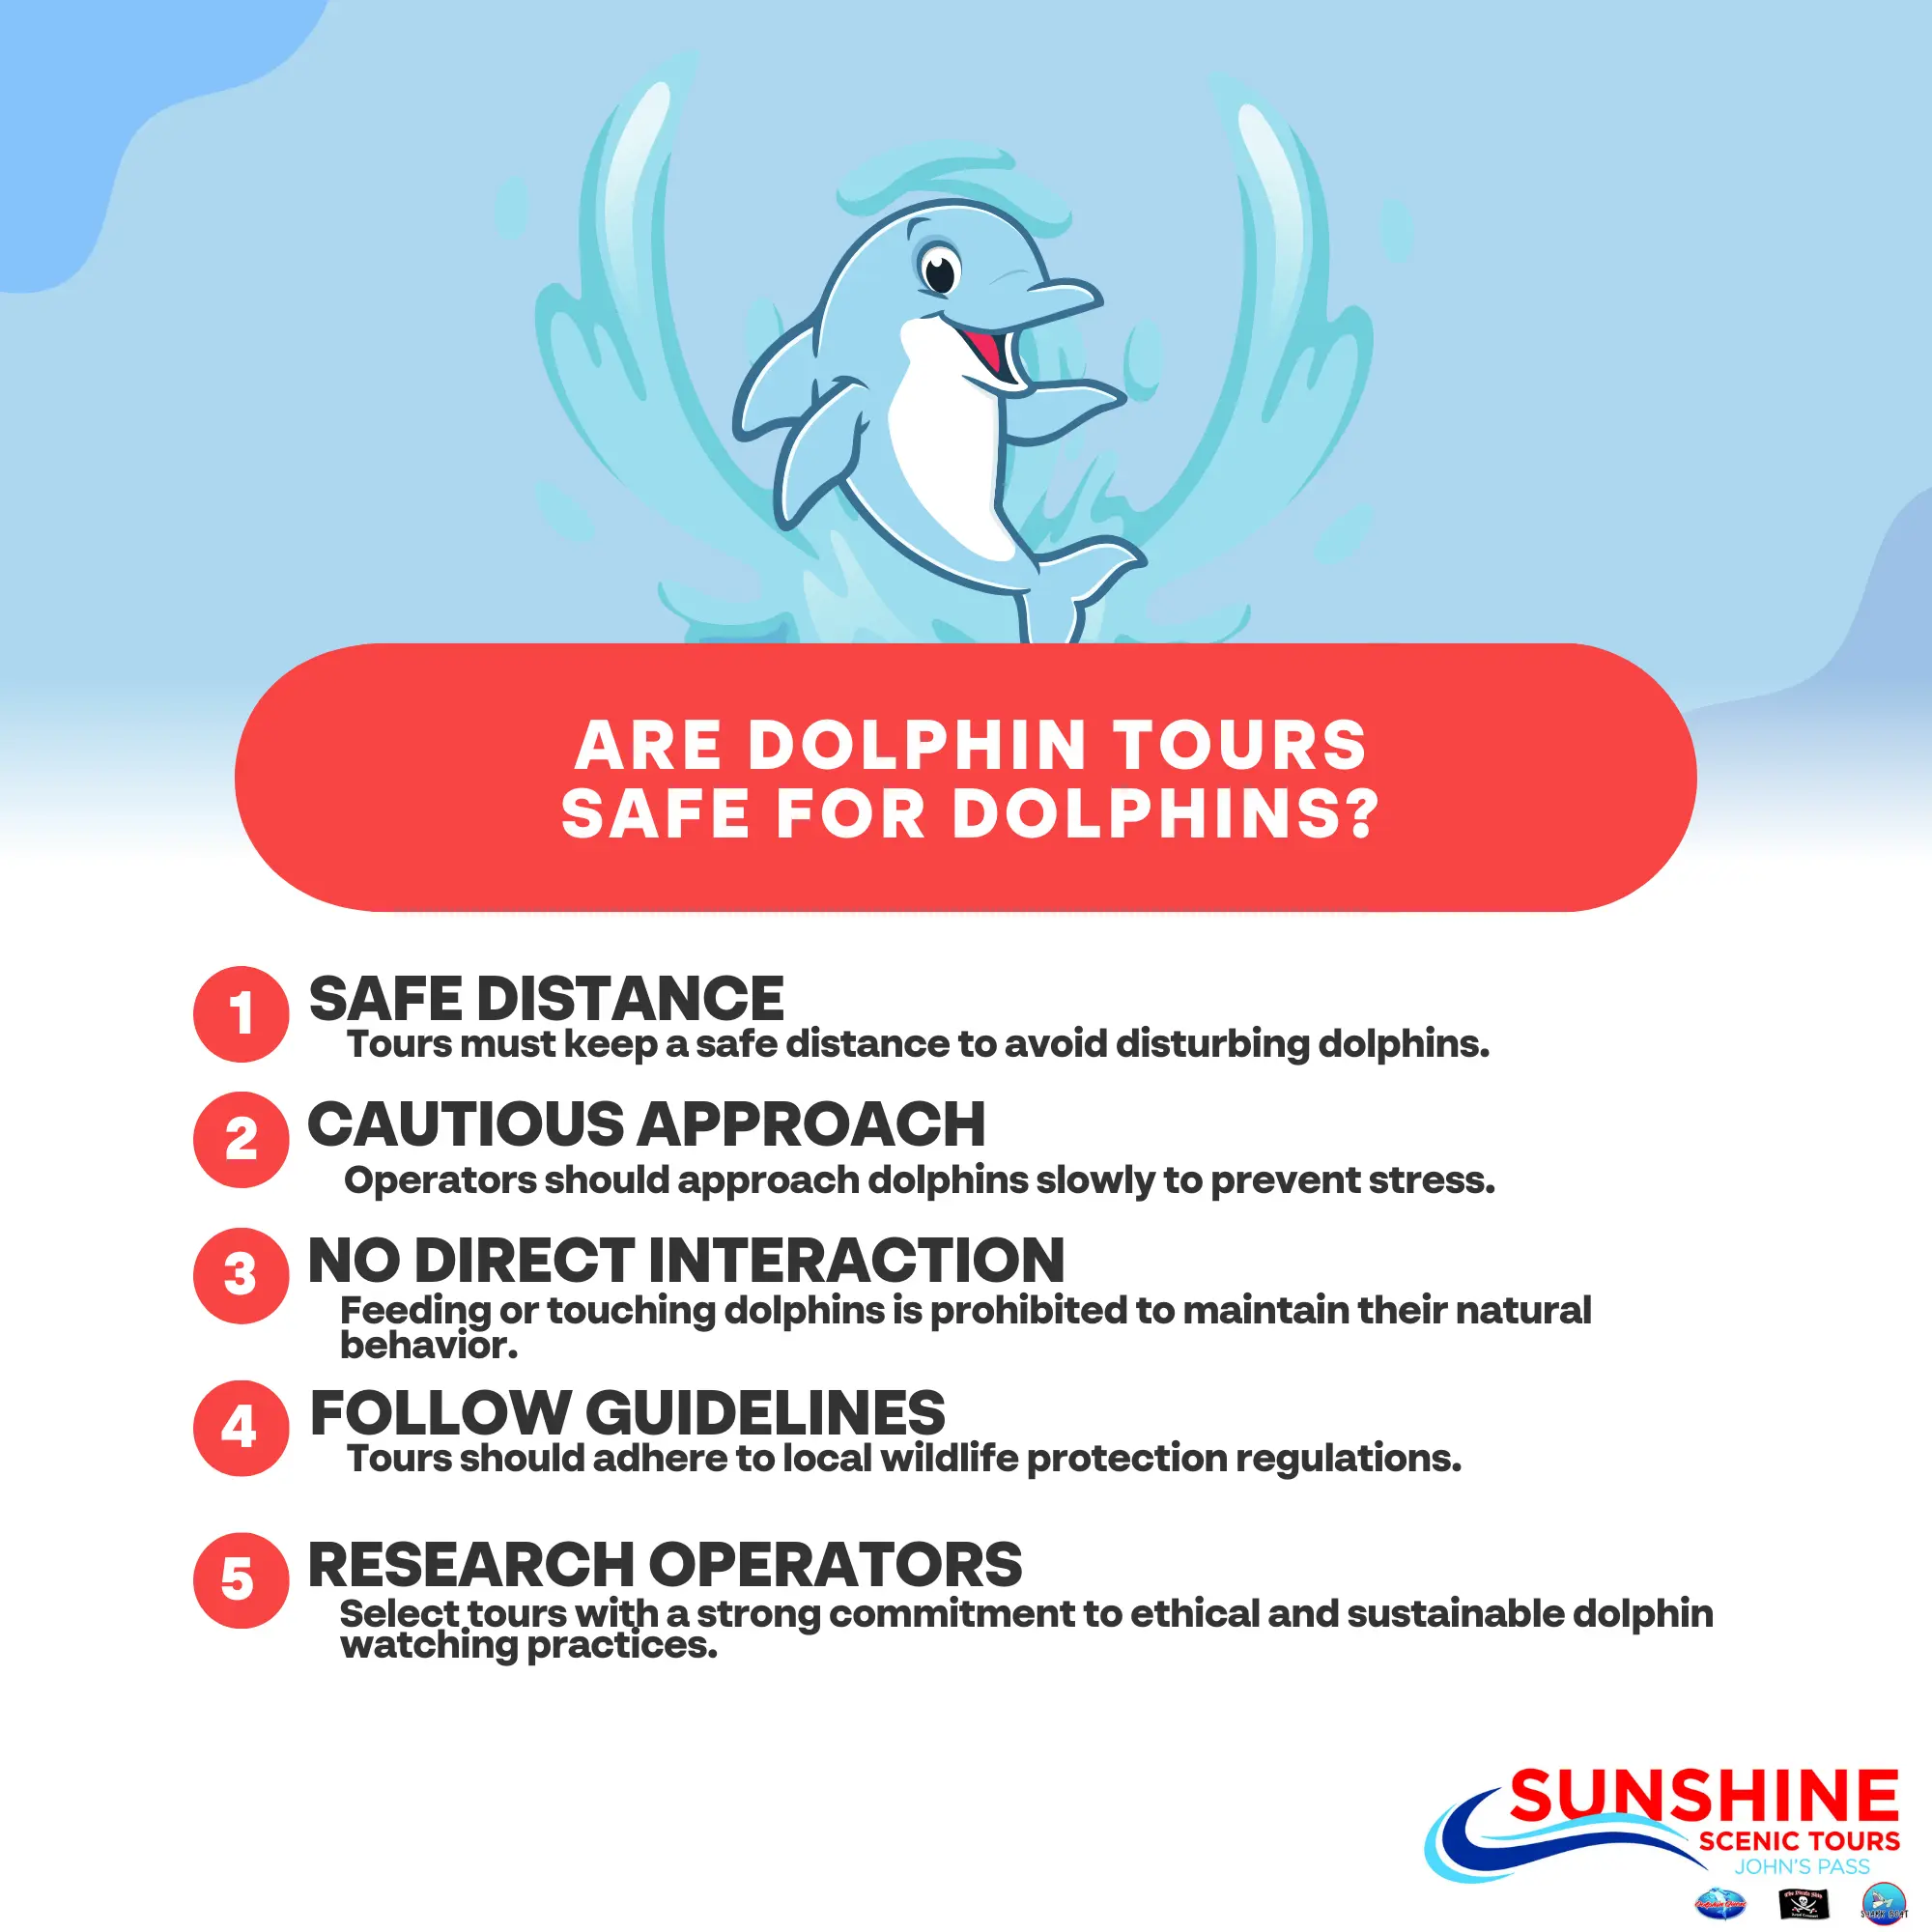 Are Dolphin Tours Safe for Dolphins?